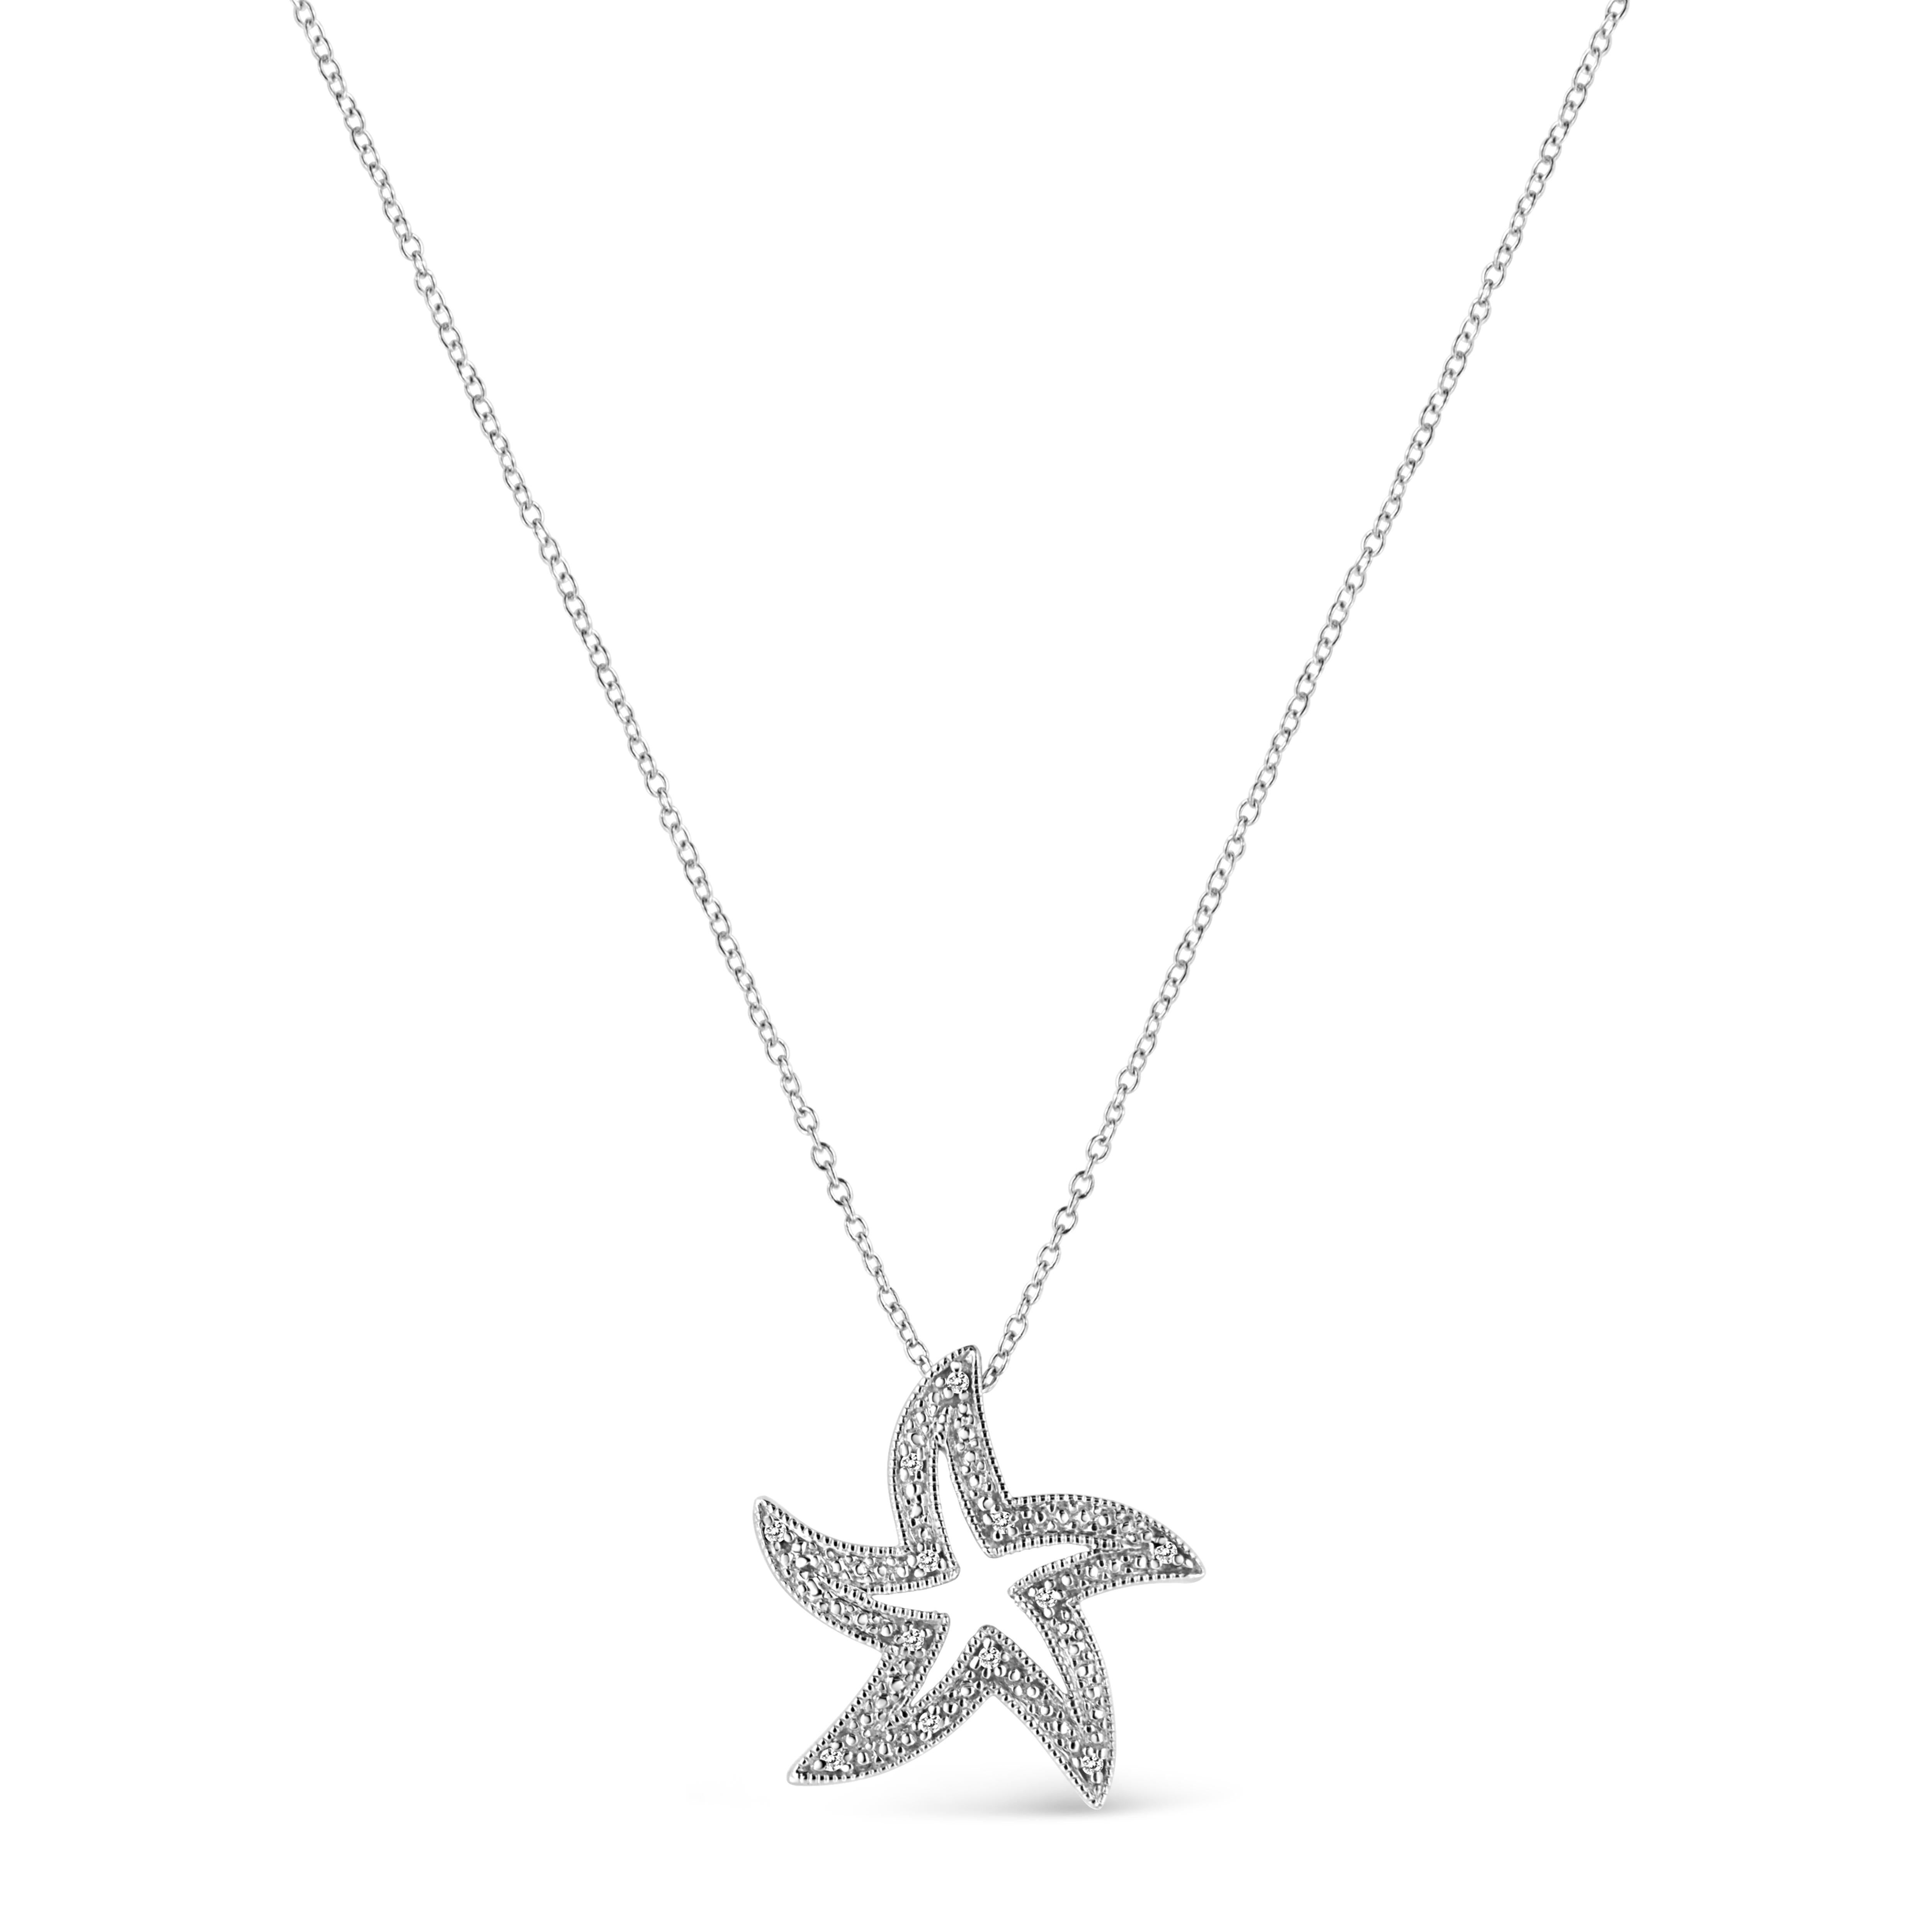 Entice her with starbursts of light-reflecting beauty of this gorgeous diamond star fish pendant crafted in sterling silver. This open design star fish is adorn with 12 prong set sparkling single cut diamonds. This dainty pendant hangs from a cable